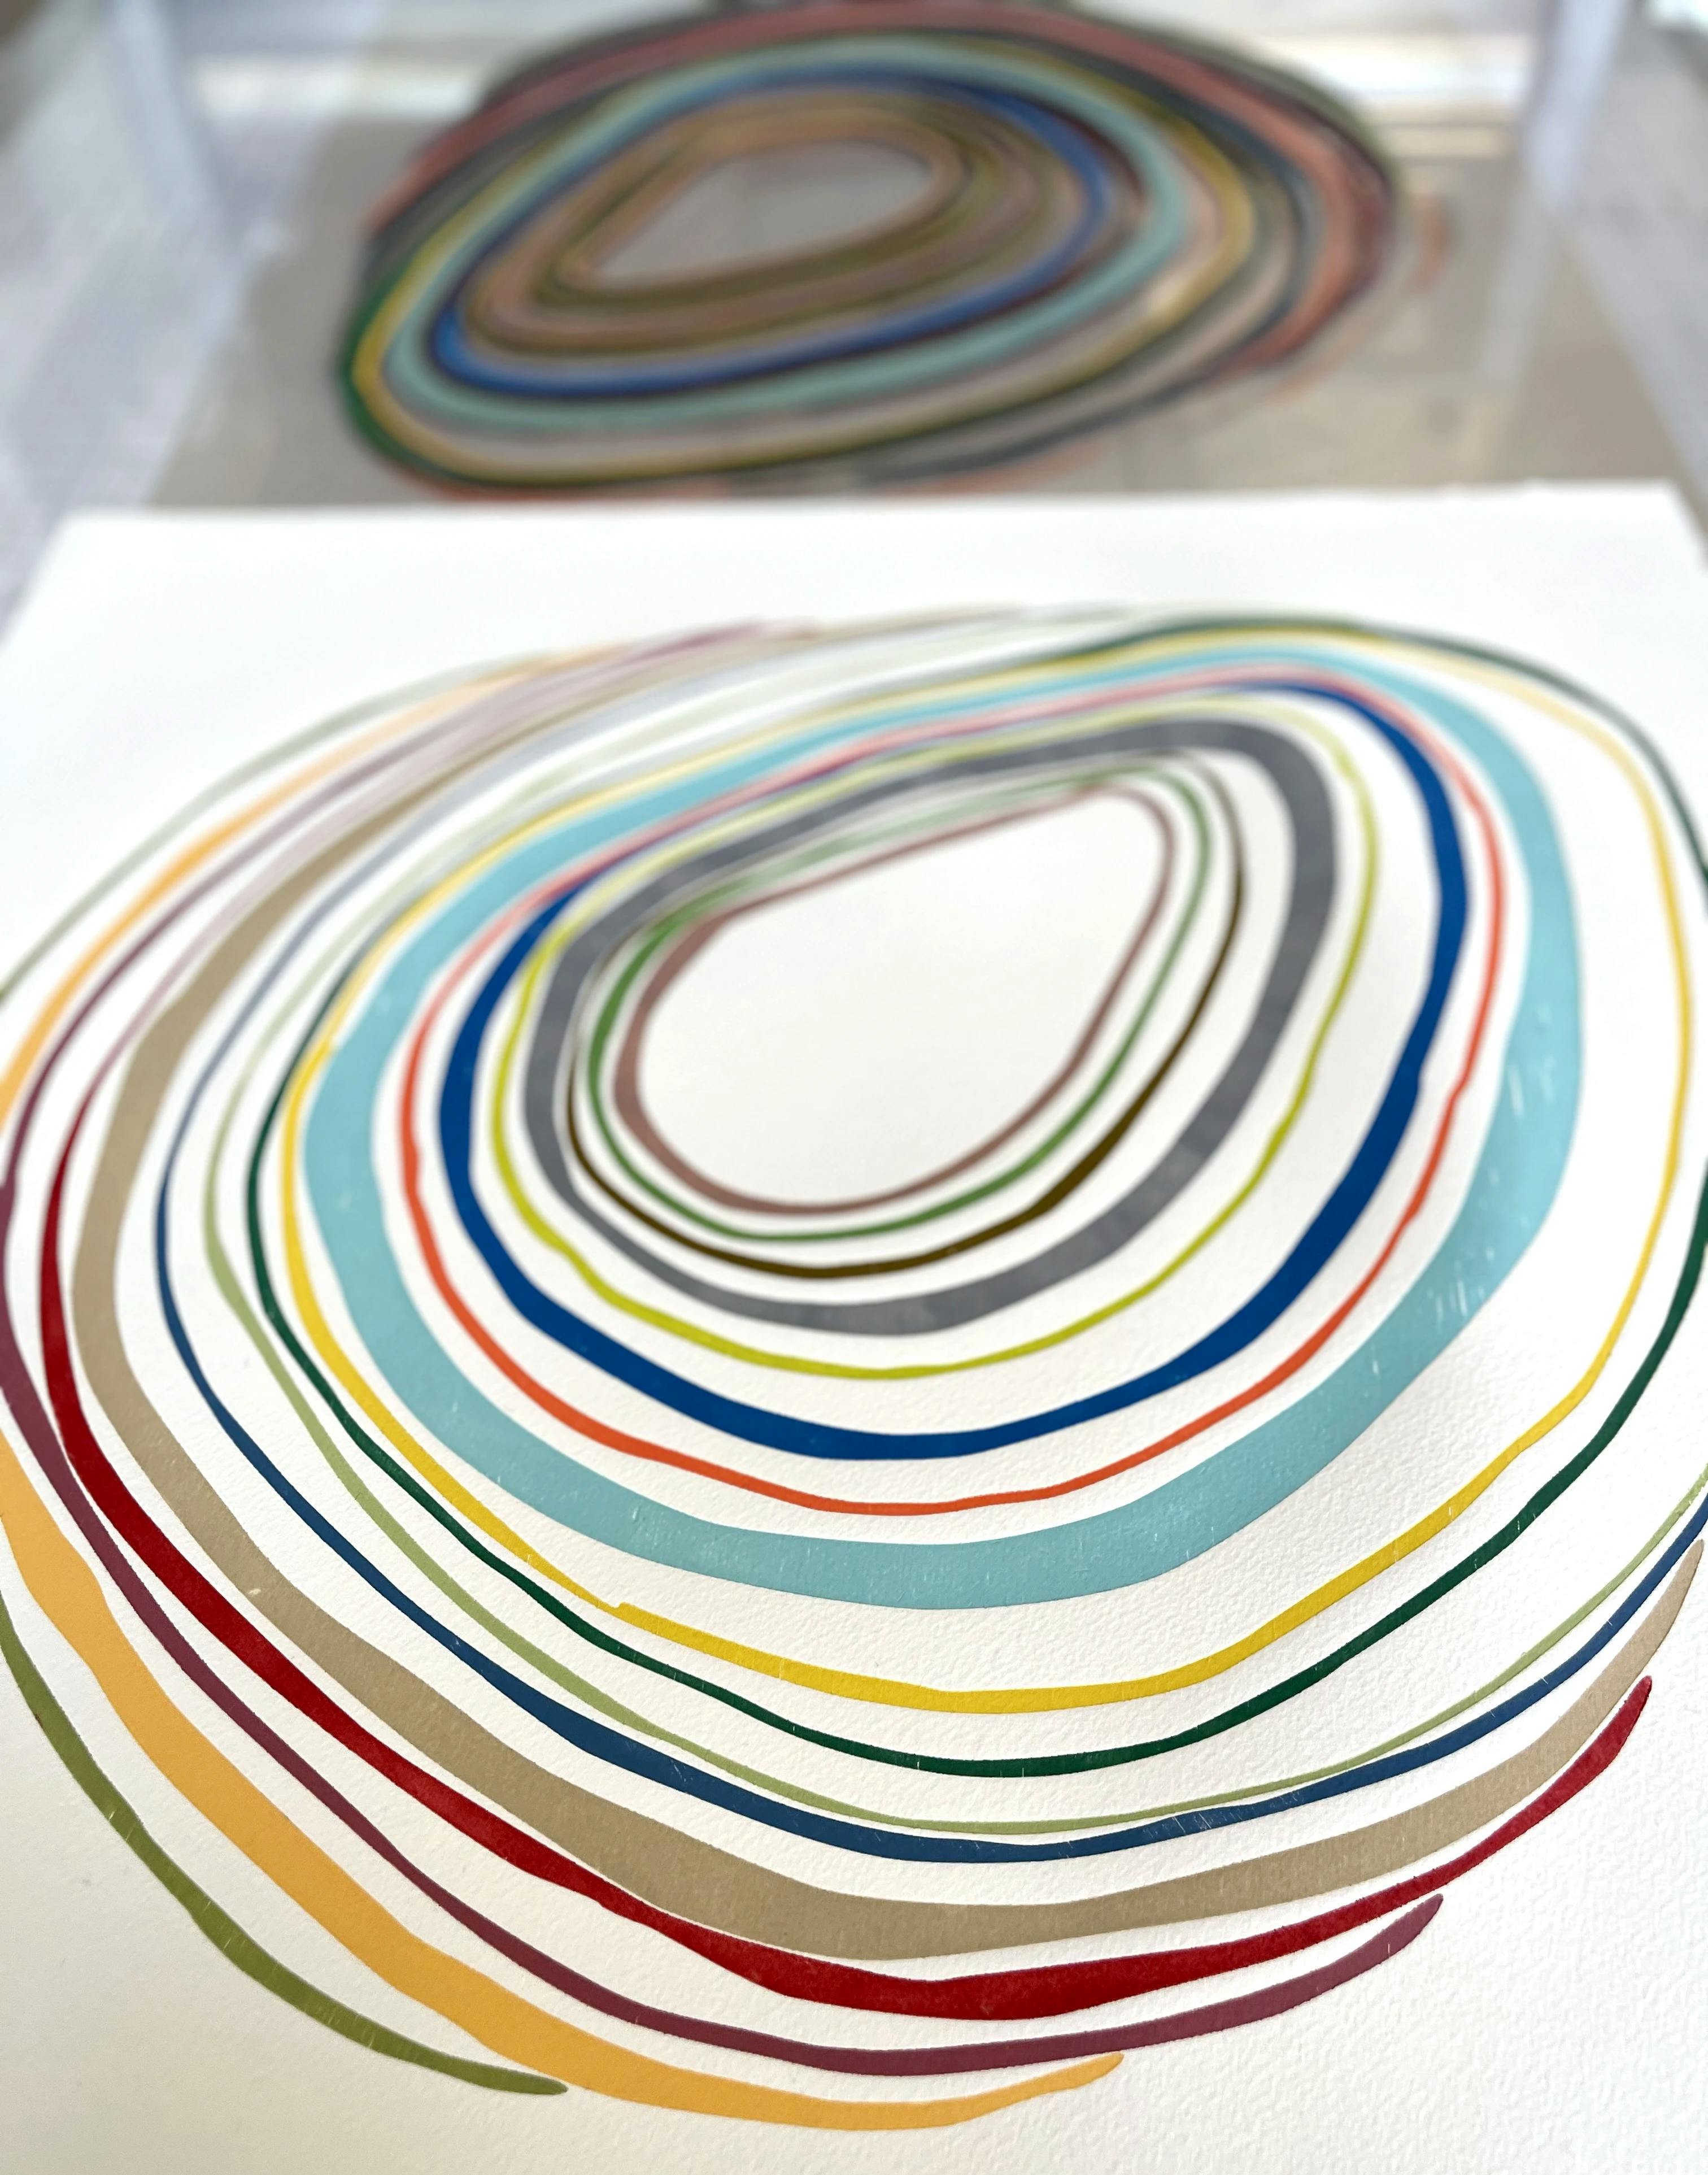 In progress relief monoprint with concentric, colorful circles by artist Laura Berman.